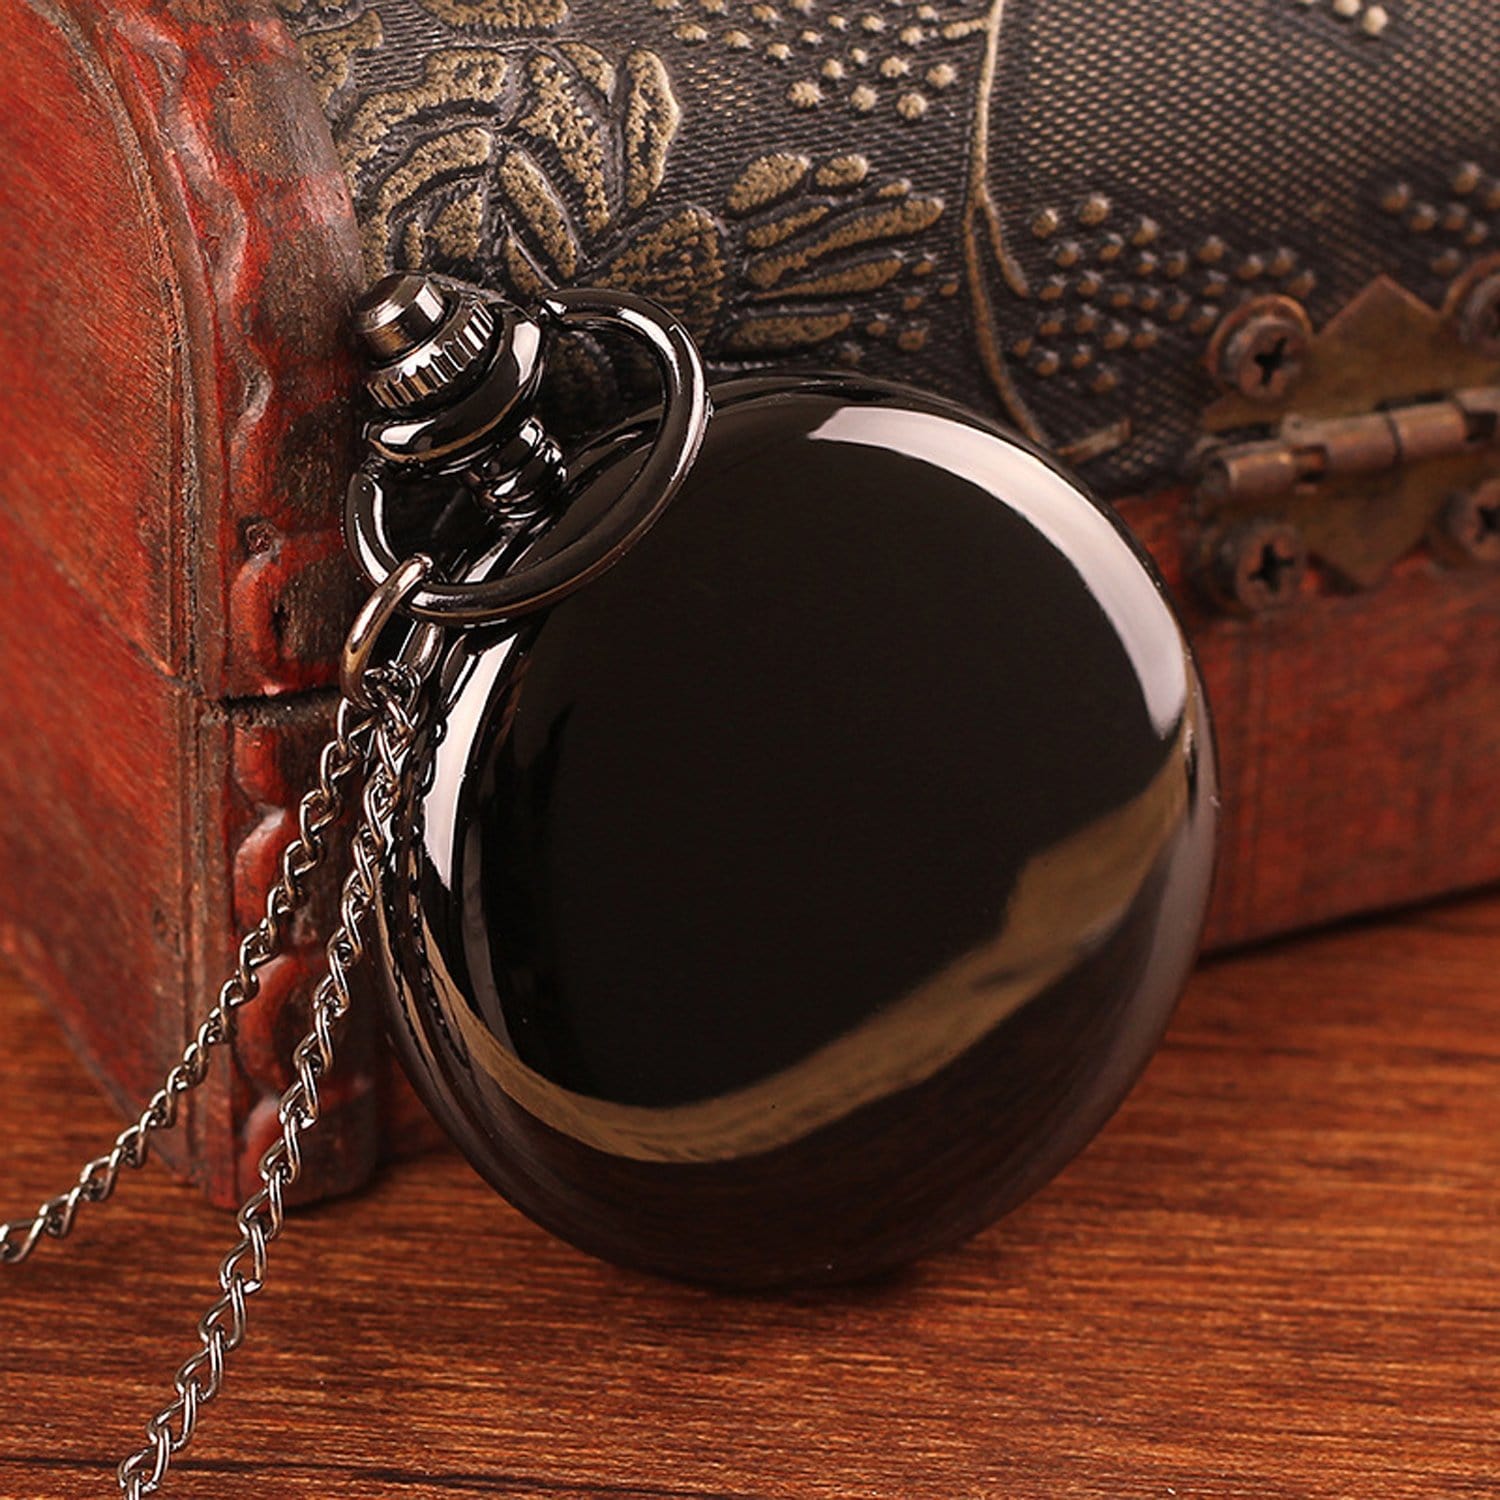 Pocket Watches For Lovers To My Boyfriend - I Love You Every Single Day Pocket Watch GiveMe-Gifts